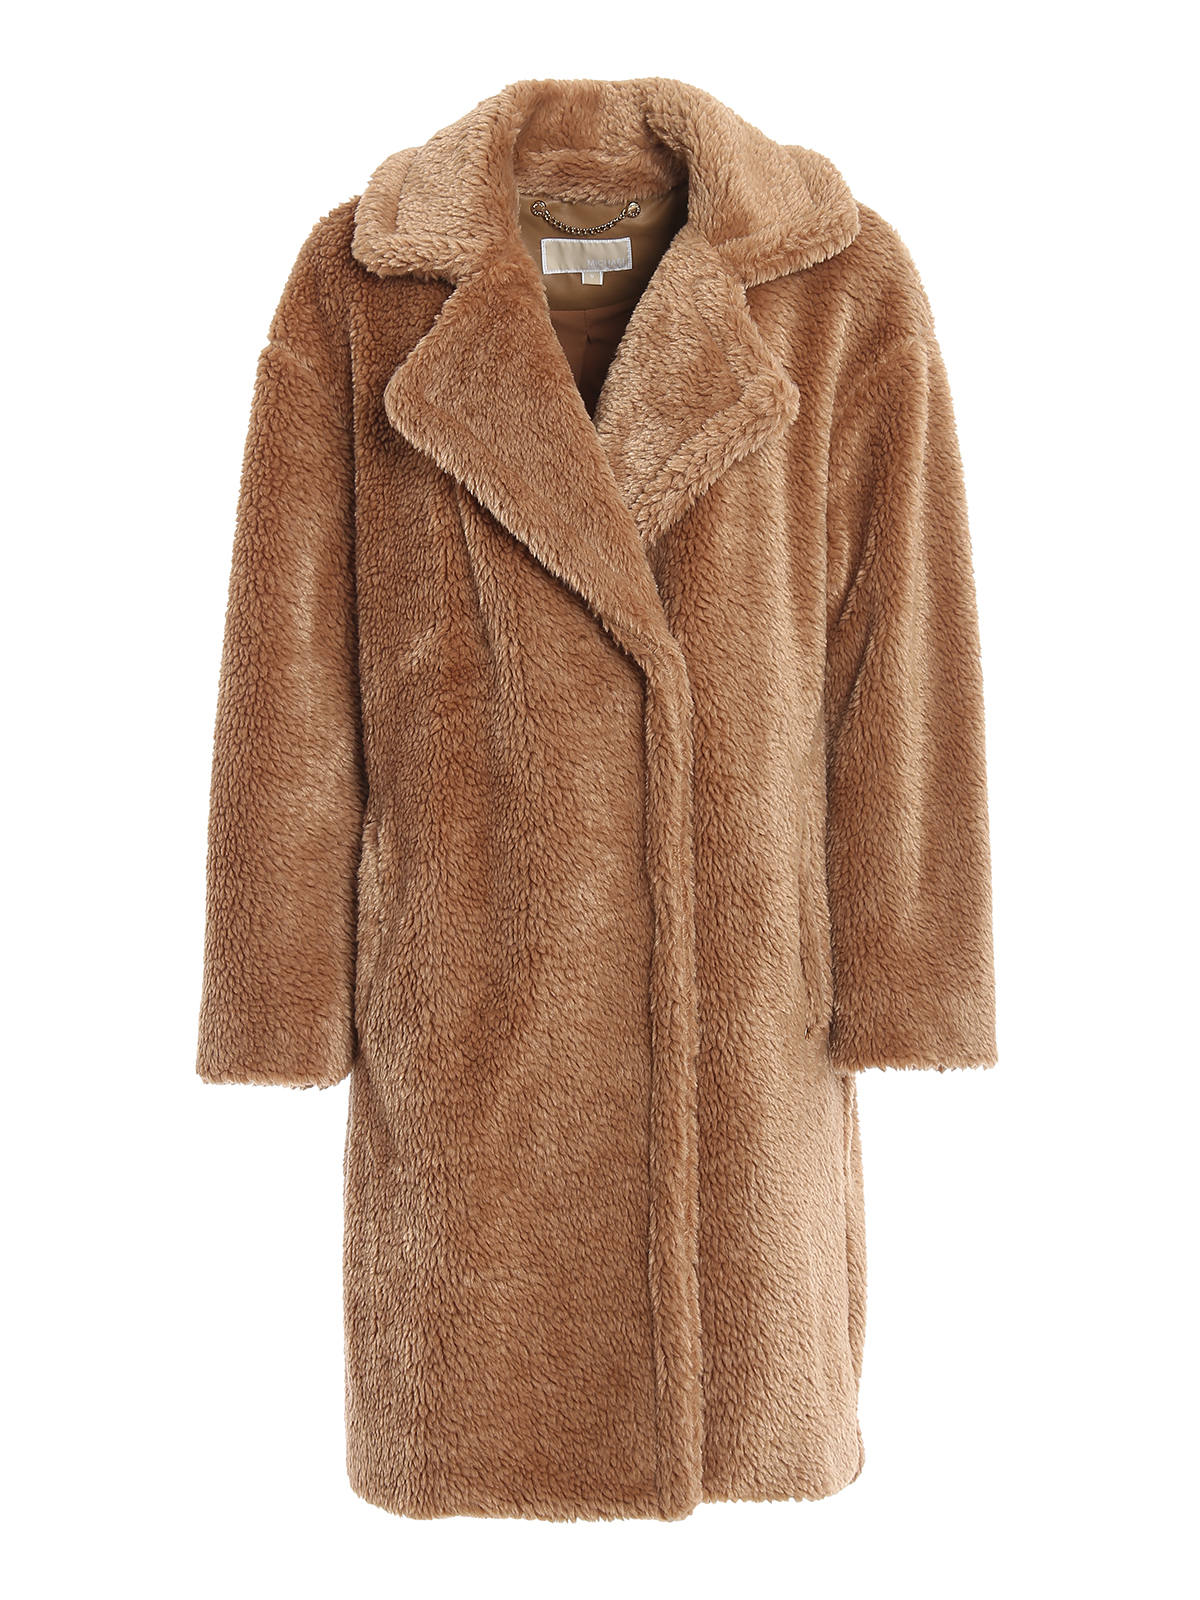 Michael Kors MICHAEL Faux Fur Double Breasted Coat women  Glamood Outlet